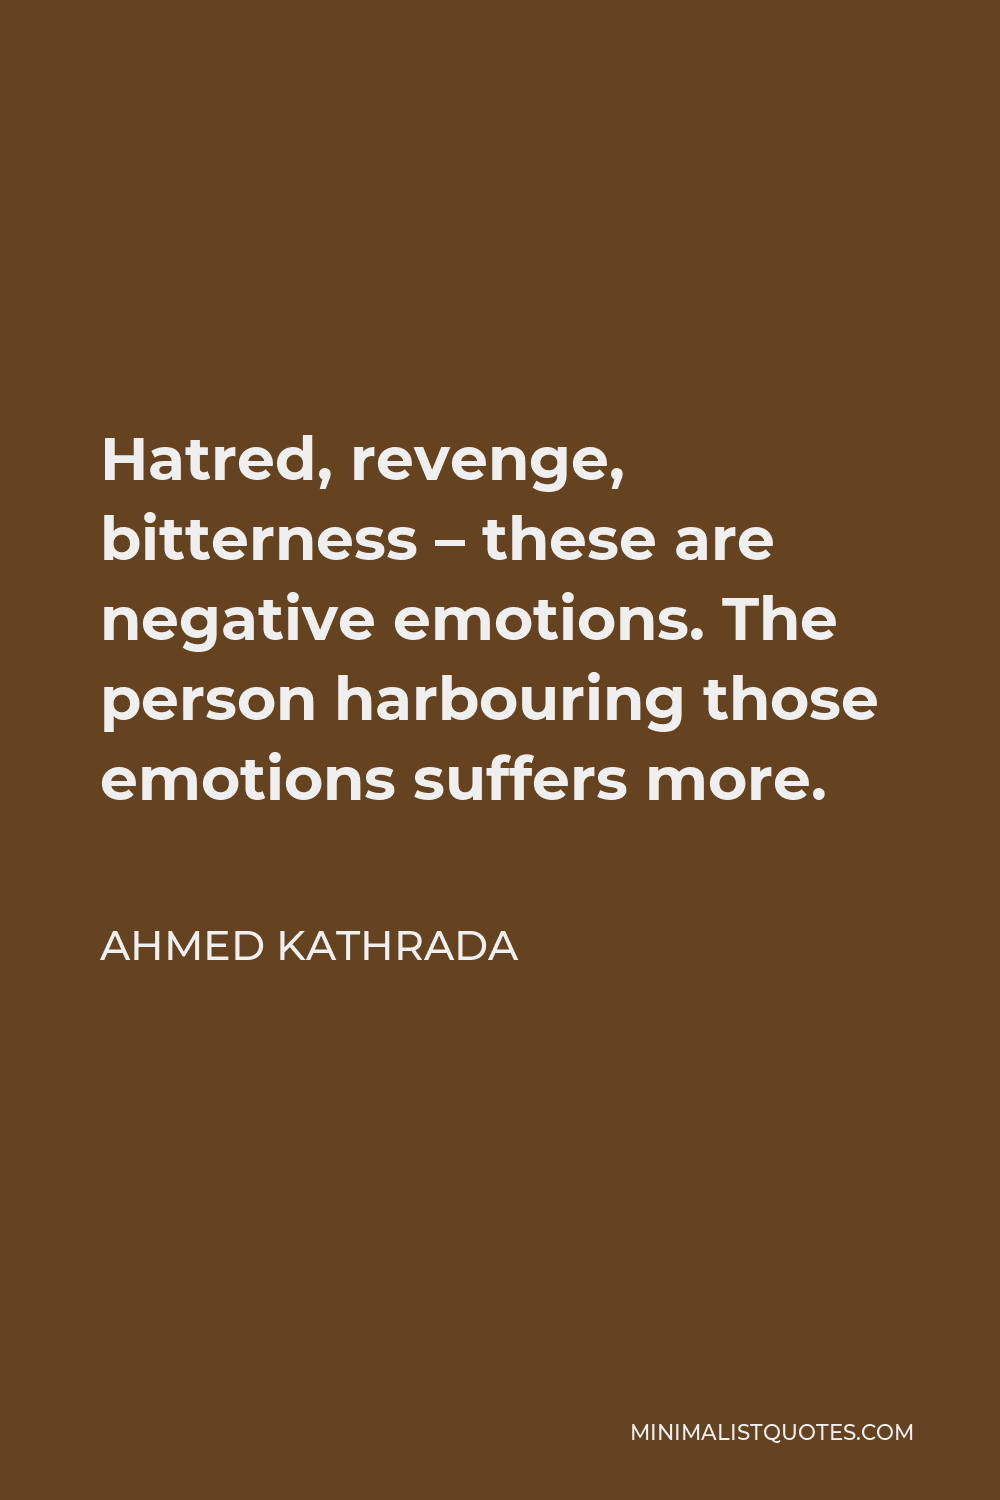 Ahmed Kathrada Quote - Hatred, revenge, bitterness – these are negative emotions. The person harbouring those emotions suffers more.